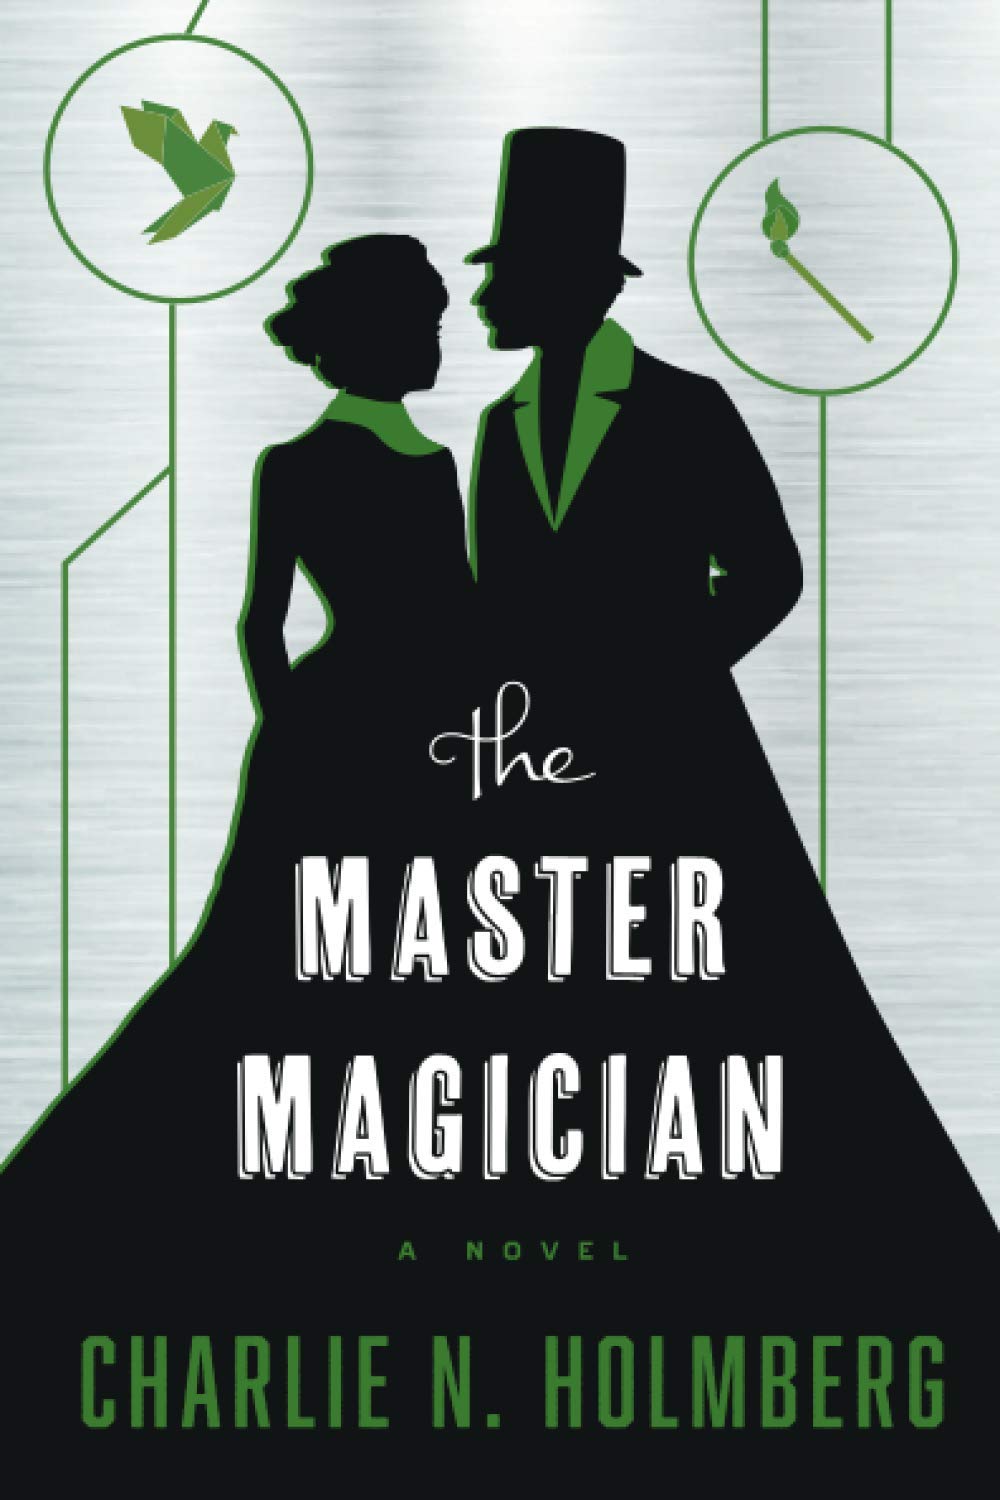 The Master Magician (2015)